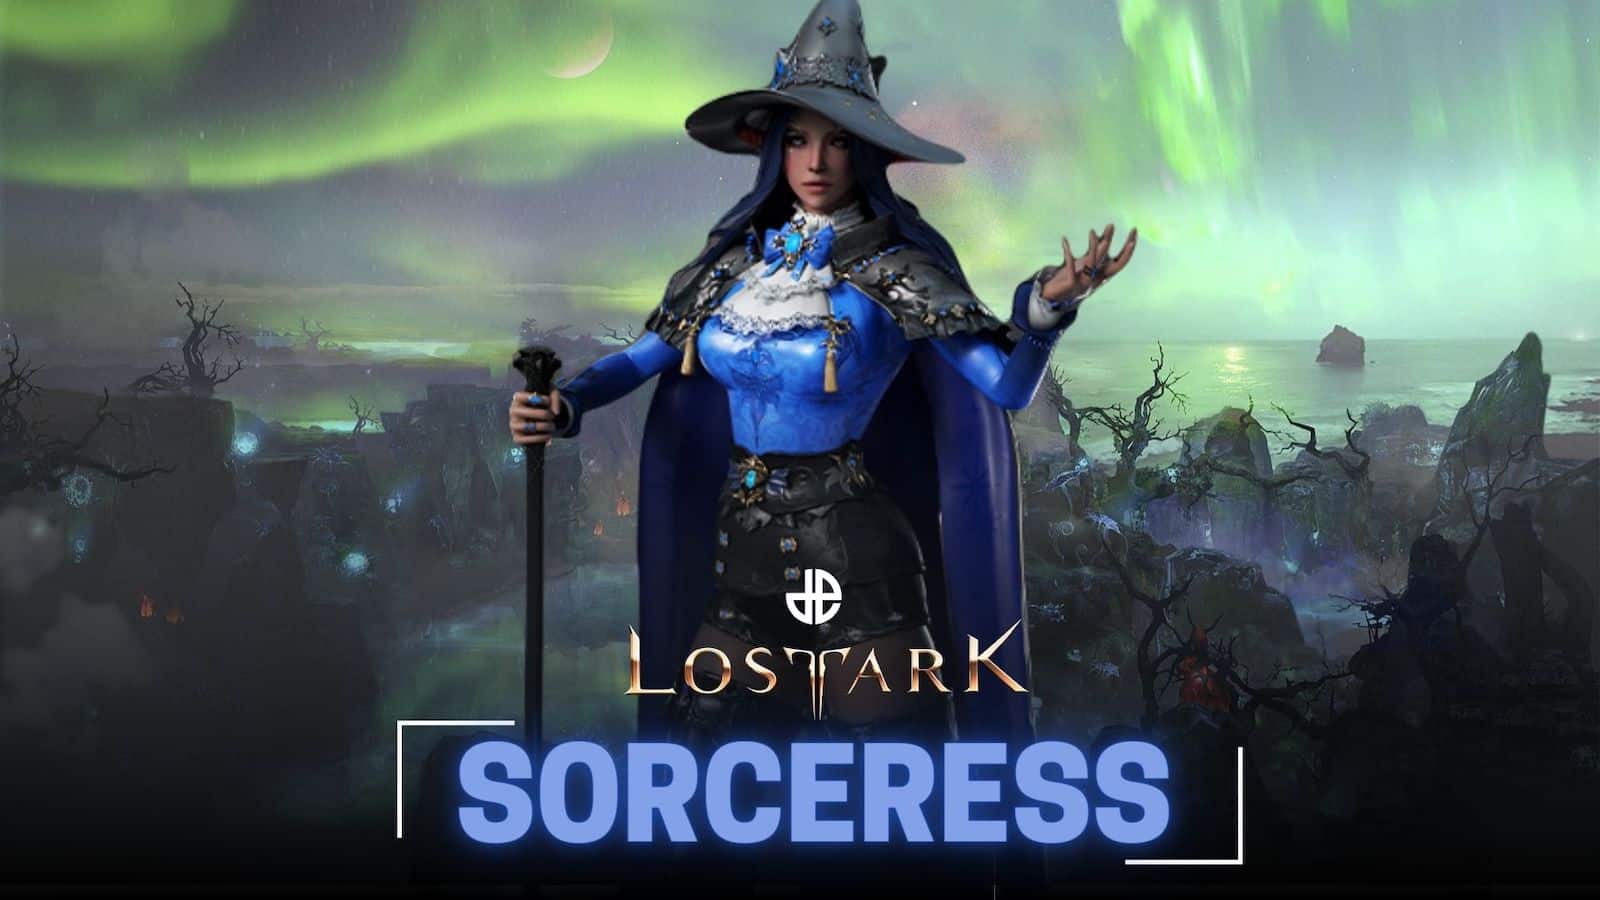 Lost Ark Sorceress Guide: Best Builds, Skills, And Engravings - GameSpot